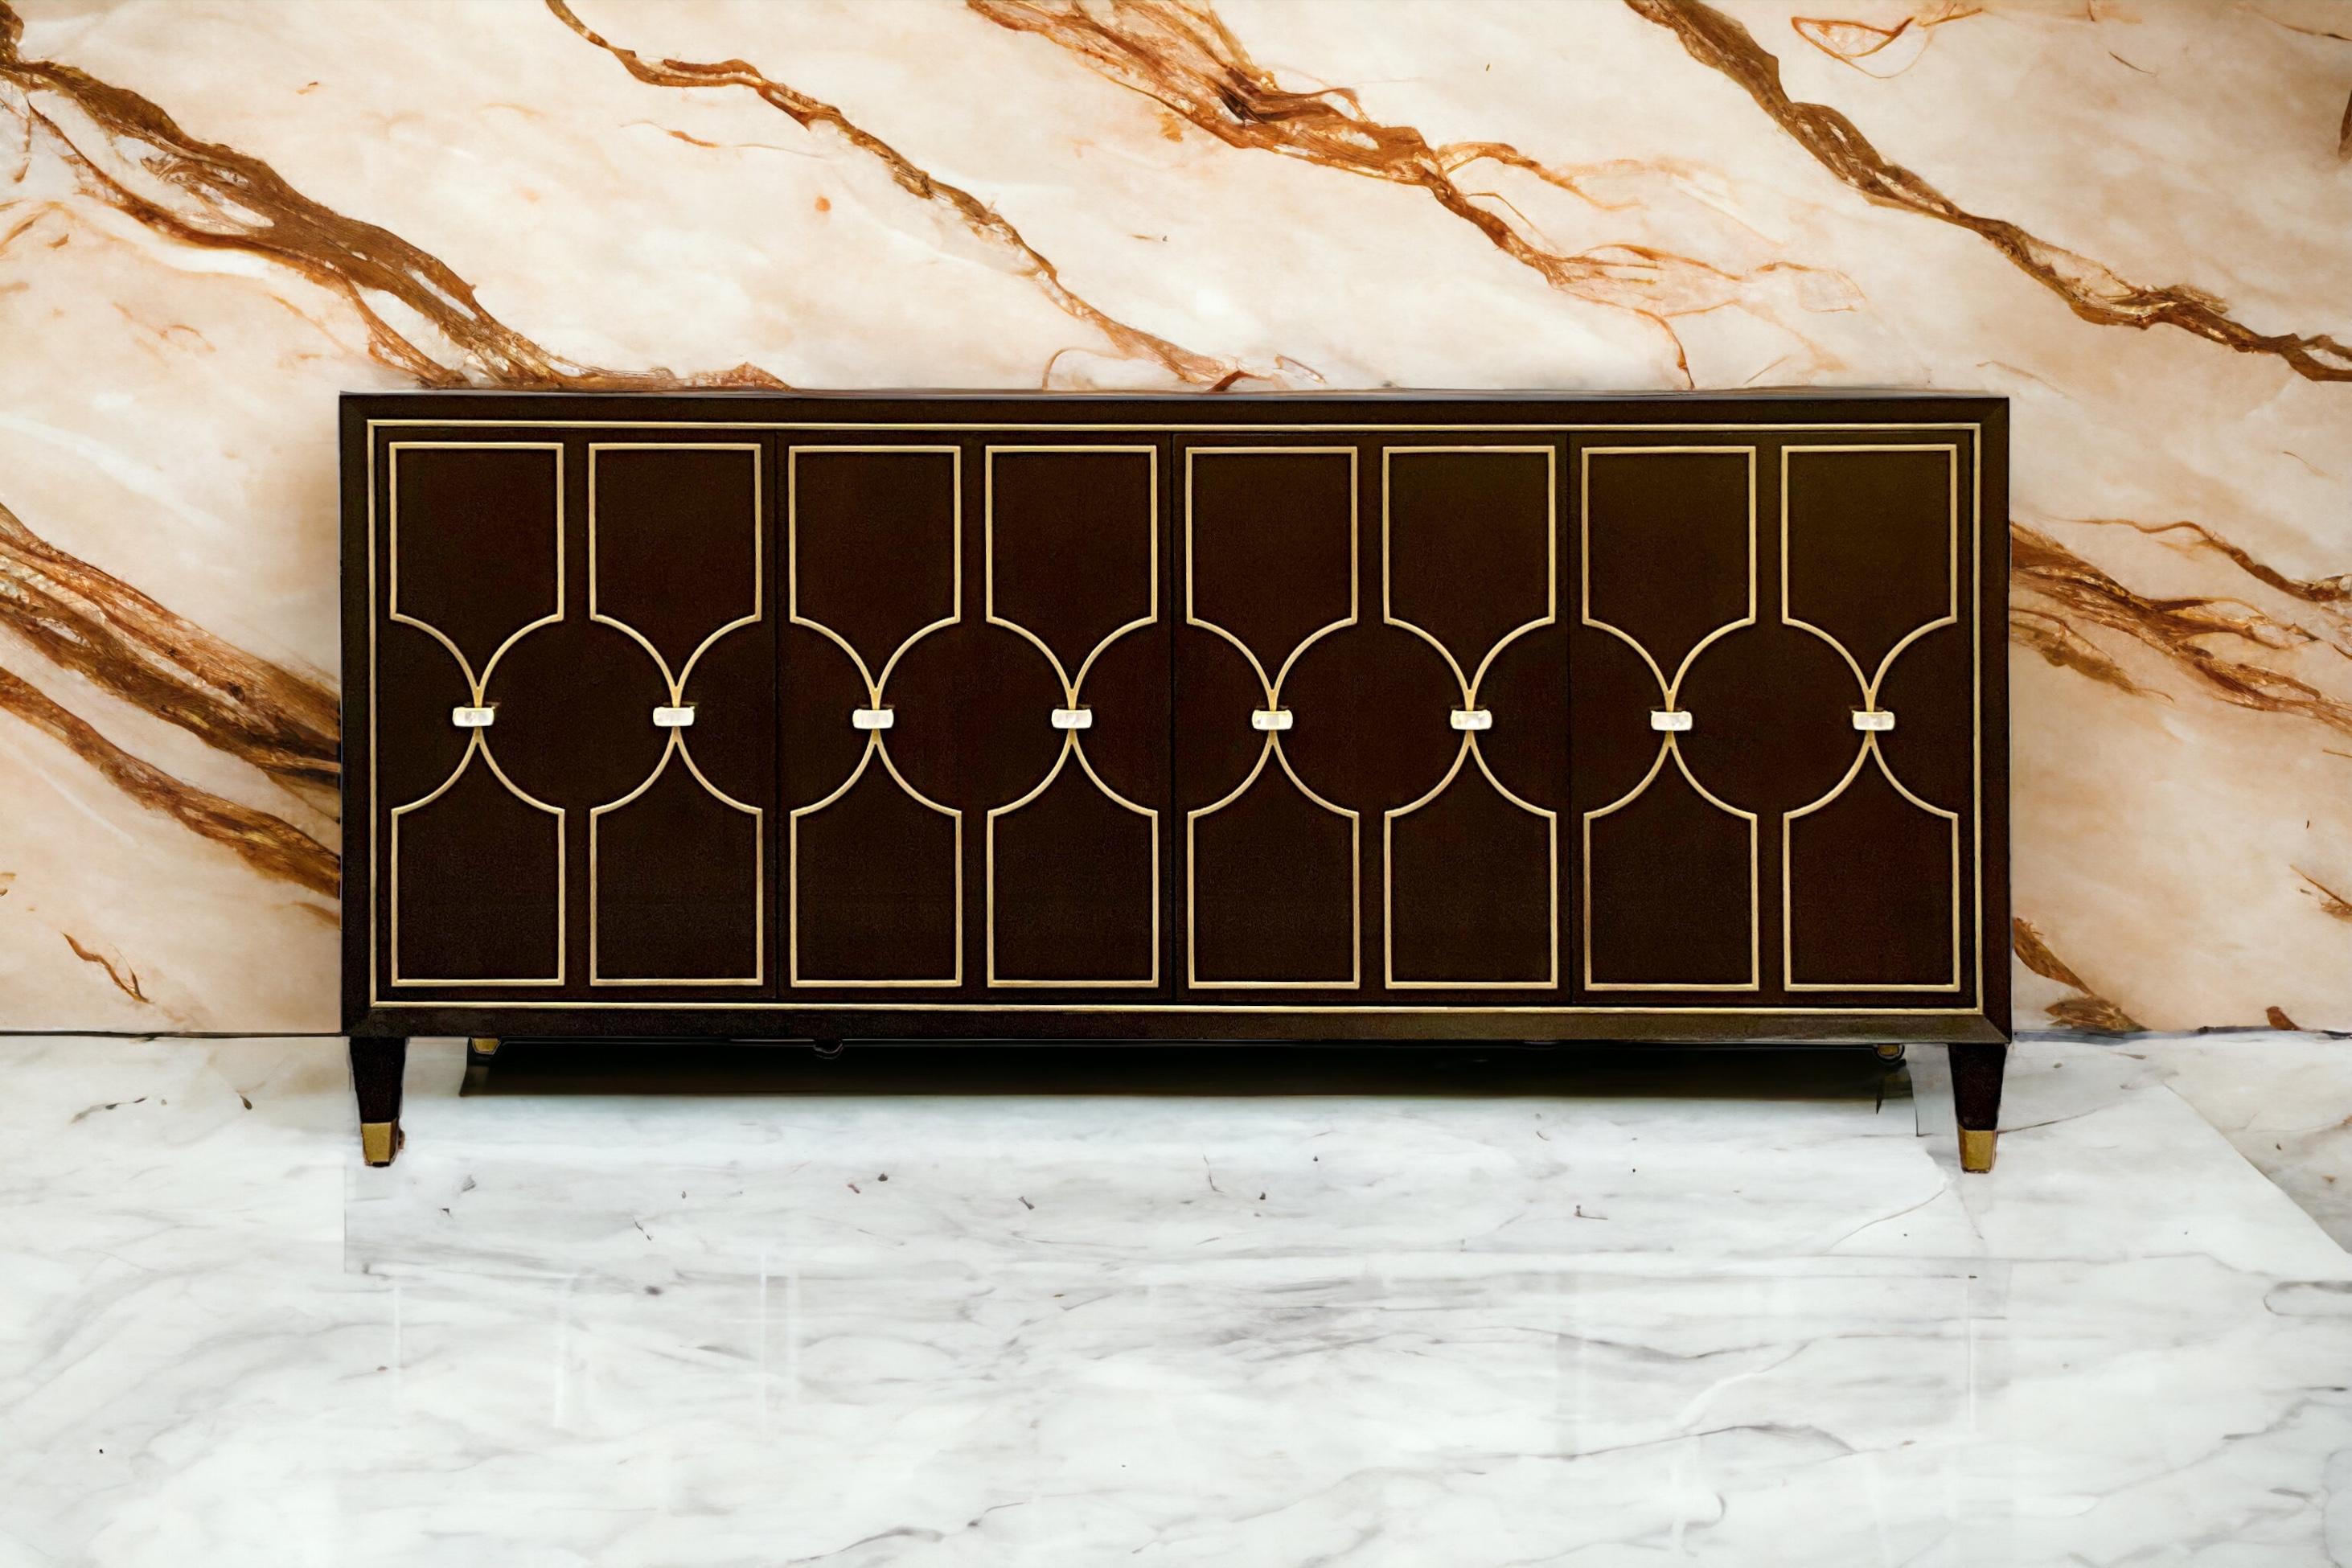 This is a beautiful modern regency style credenza by Lexington Furniture. It is no longer in production and is part of the Carlyle Collection. The piece is a mix of walnut and mahogany veneers with an espresso finish. It opens to shelves. The